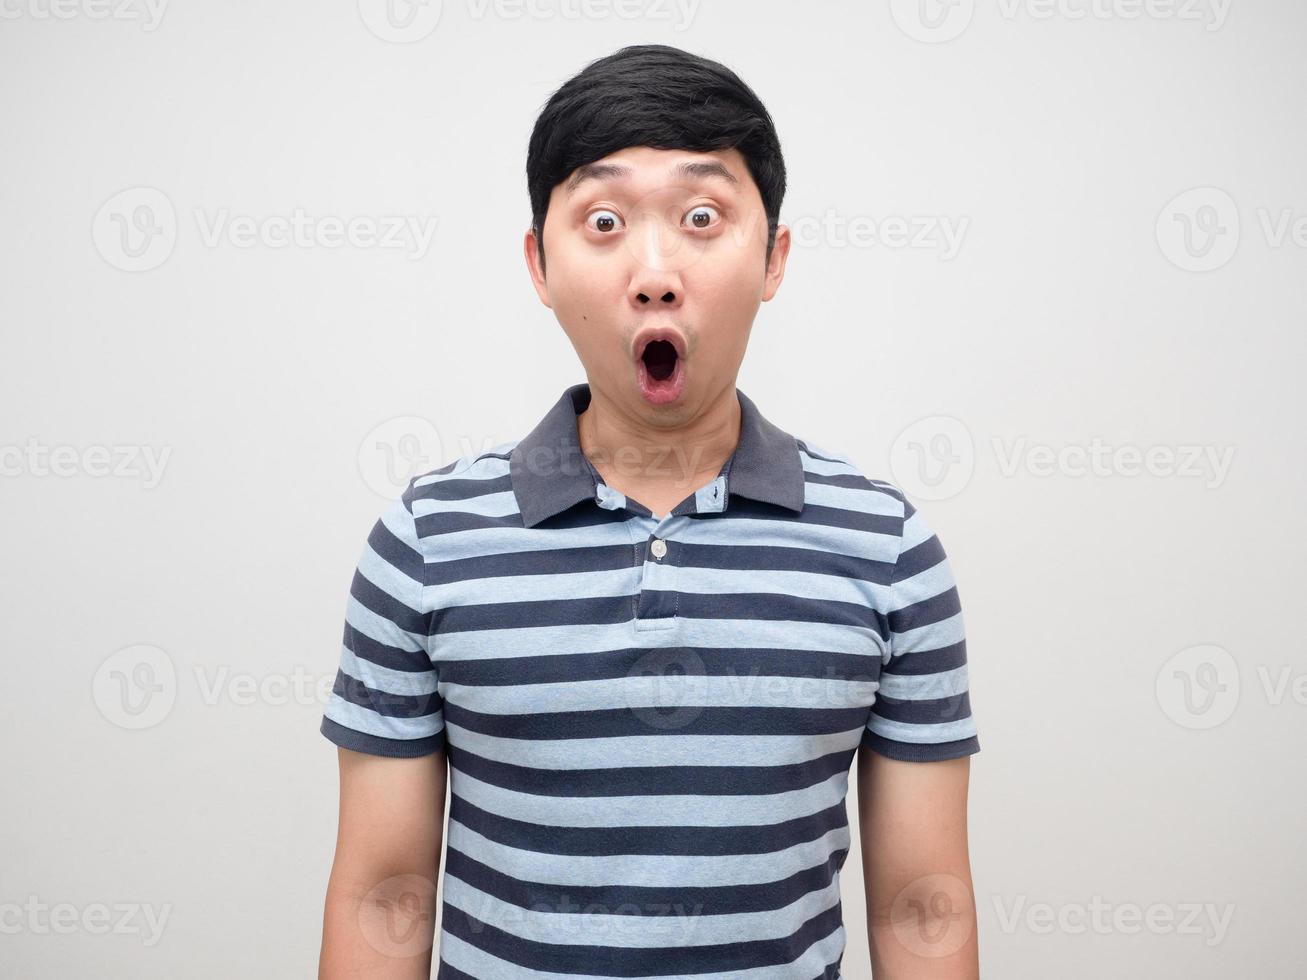 Young man striped shirt gesture shocked emotion isolated photo